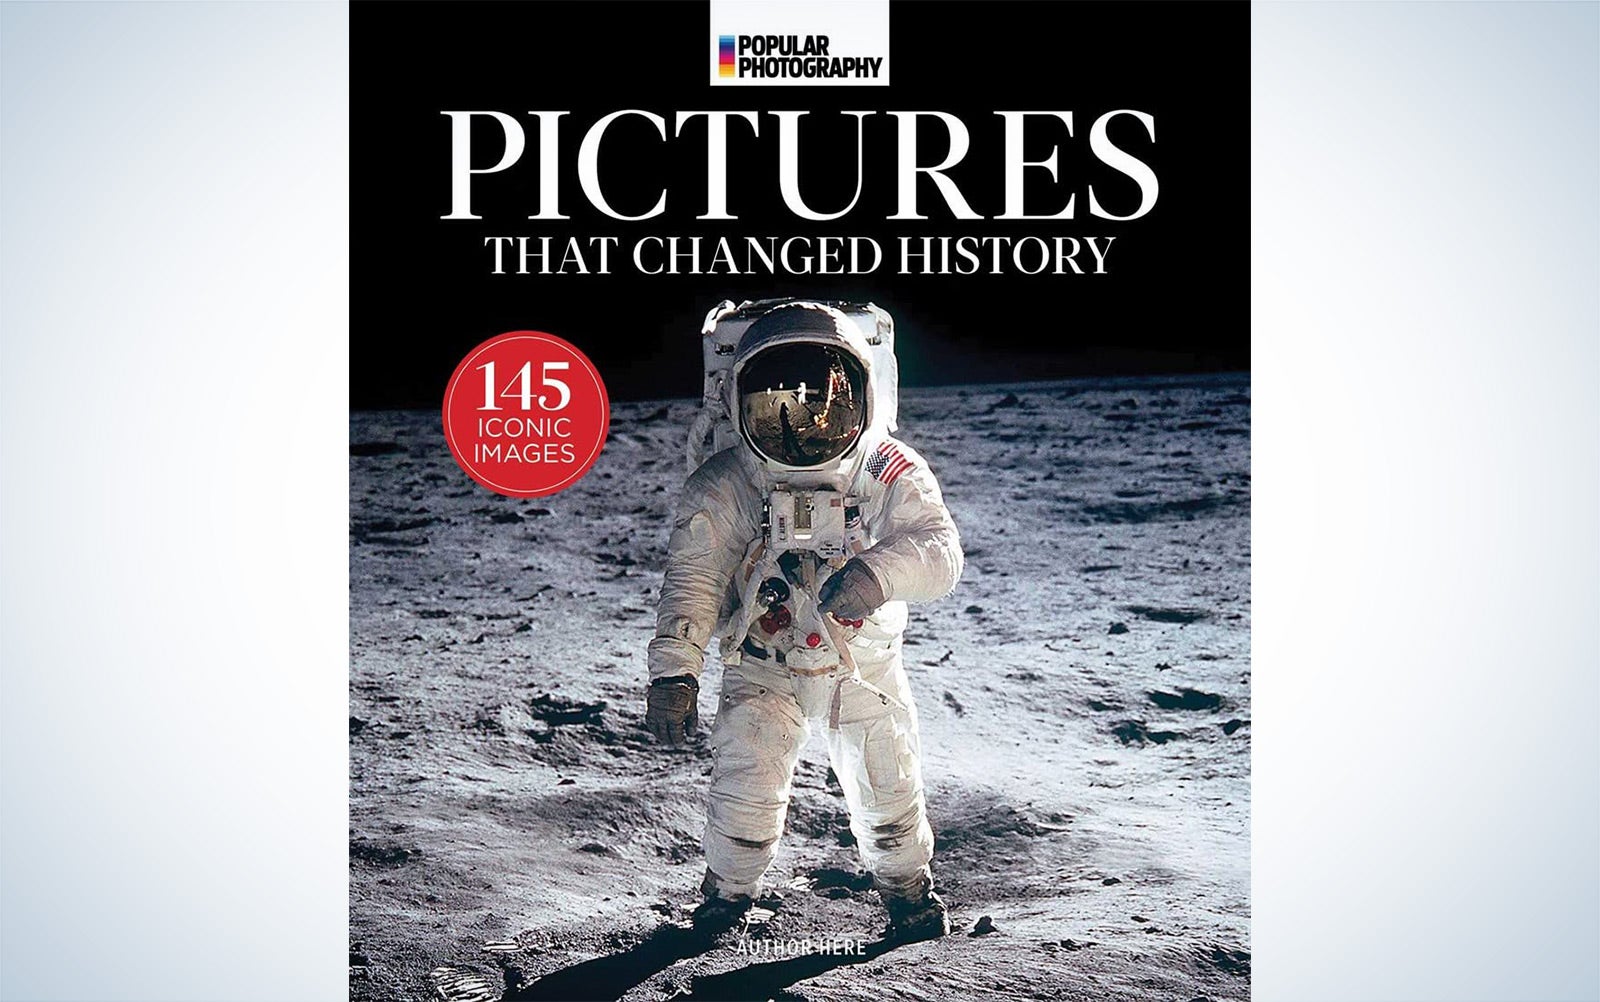 The cover of a photography book titled Popular Photography: The World’s Most Iconic Photographs